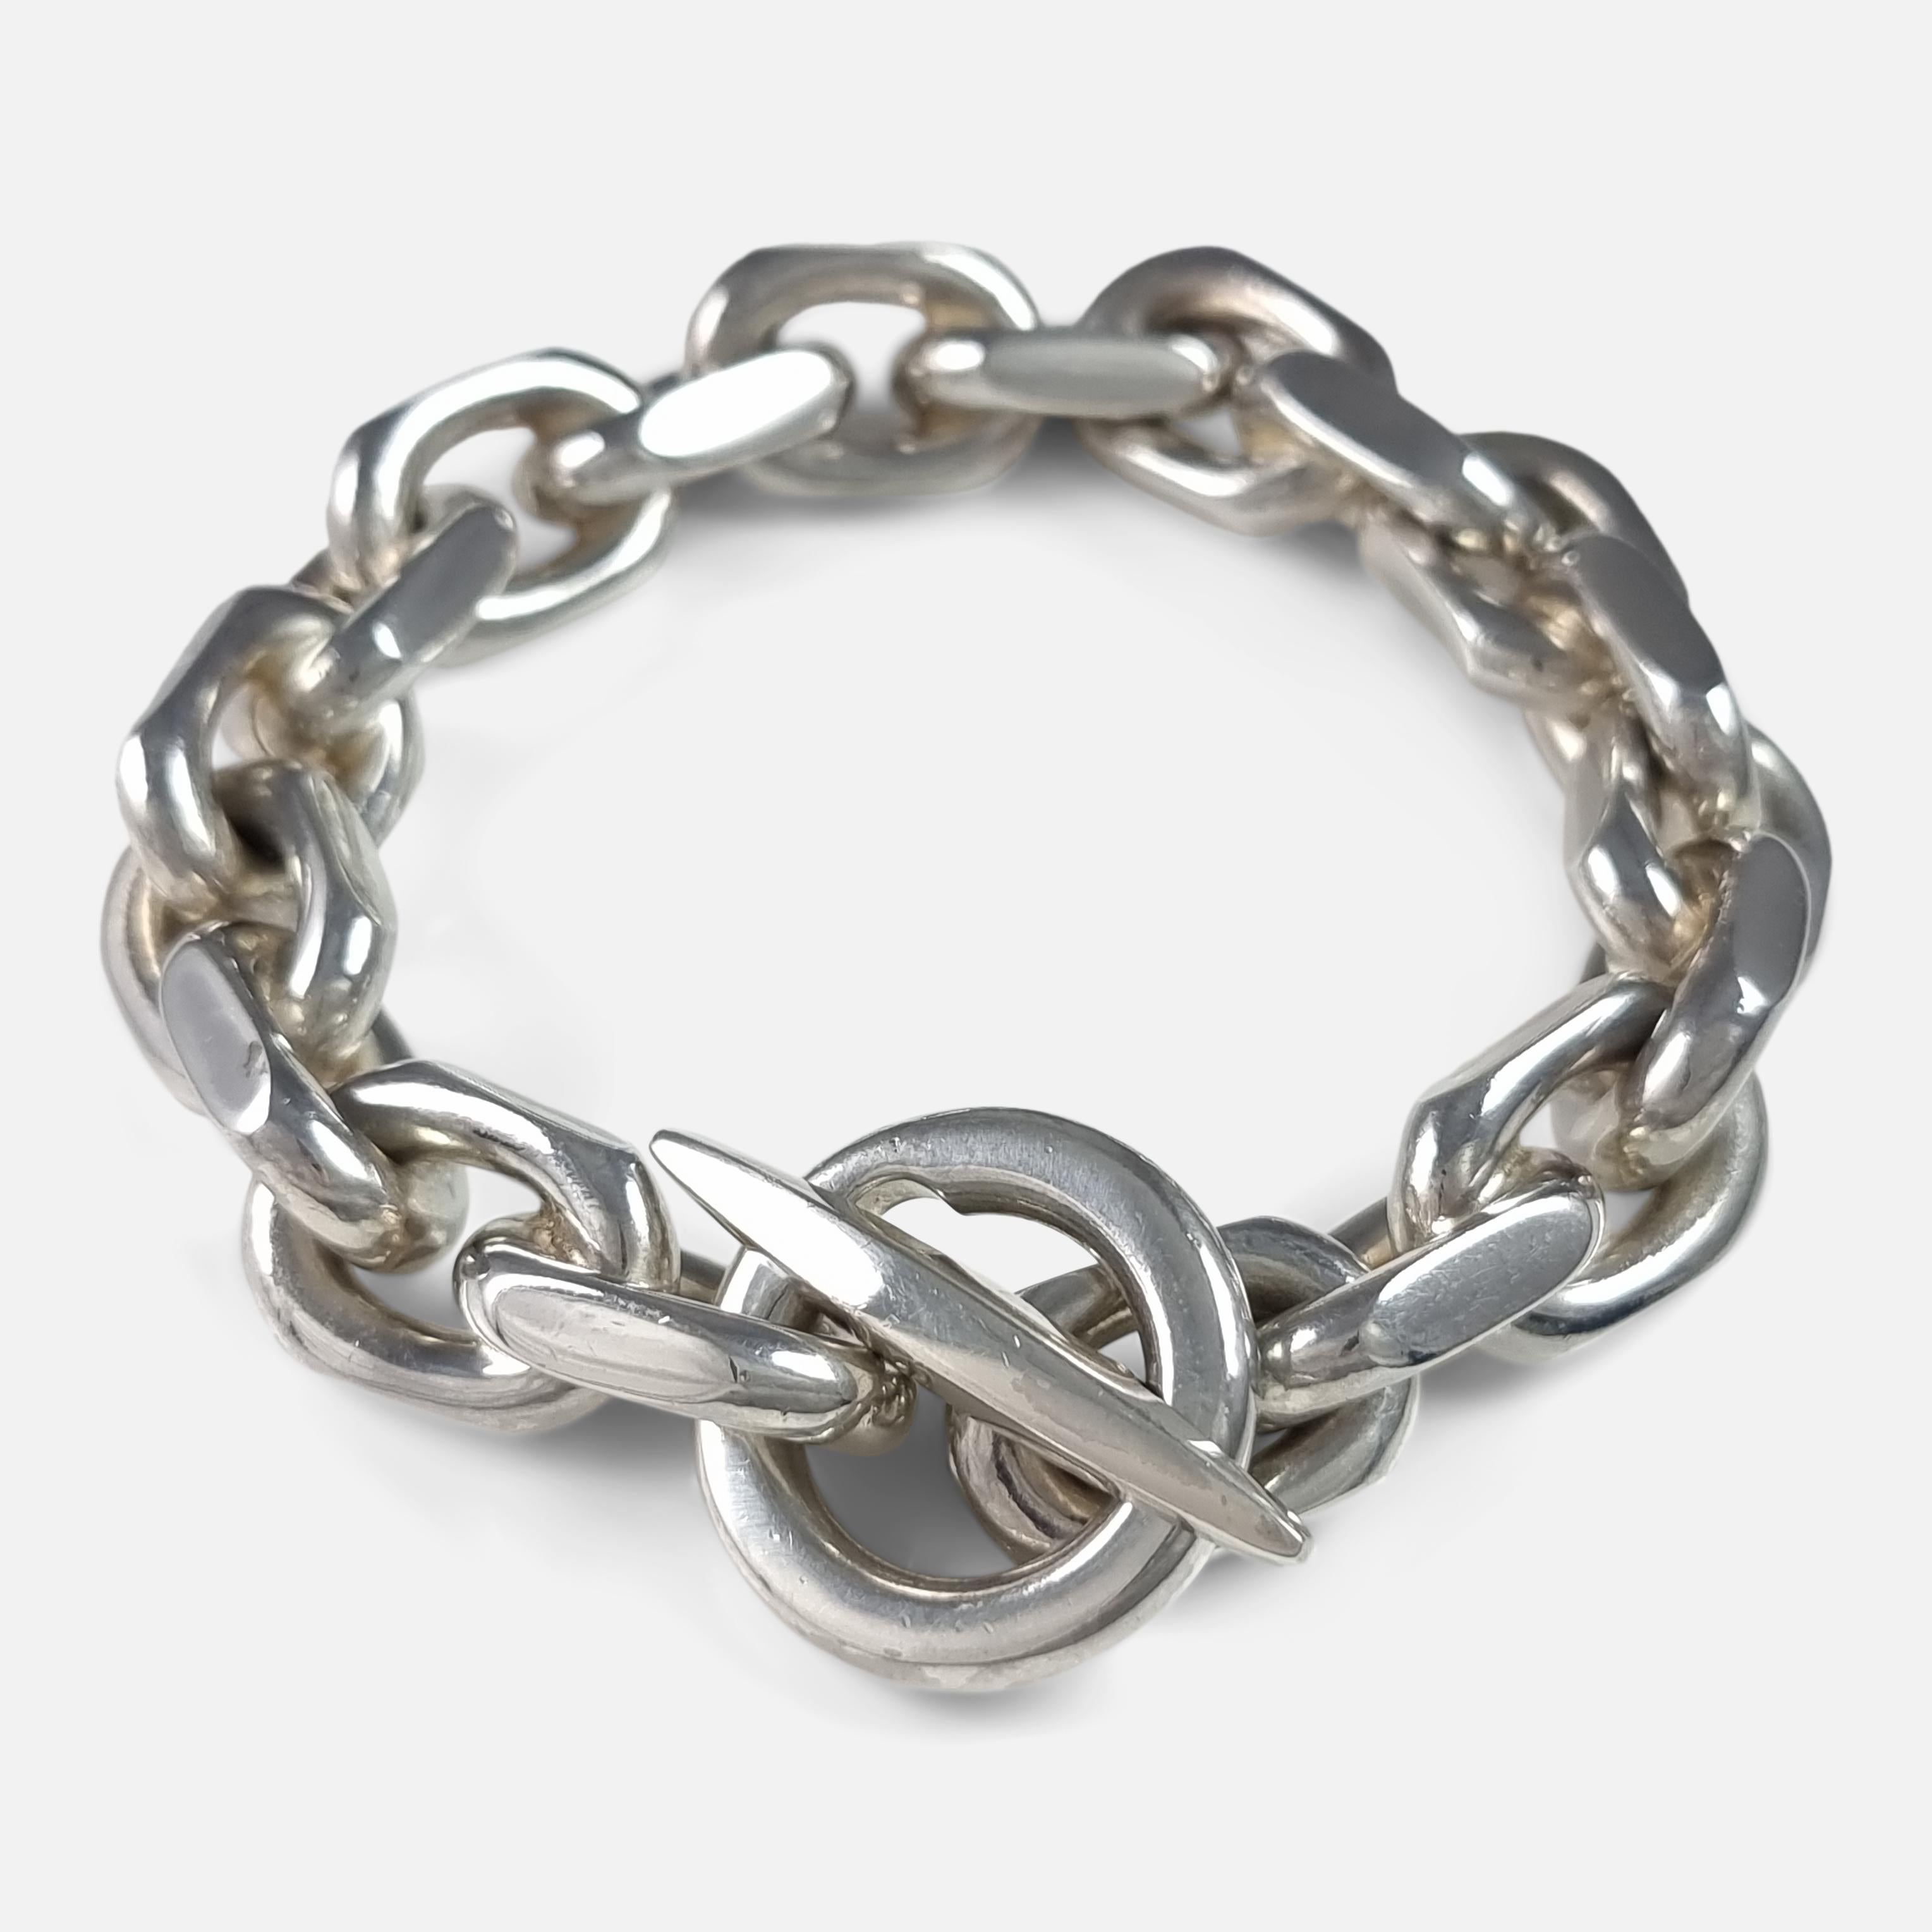 A Danish sterling silver marine link bracelet, by Bjarne Nordmark Henriksen.

The bracelet is stamped with the makers mark 'BNH', and '925s'.

Edinburgh hallmarked, stamped with the Common Control Mark '925' to denote sterling silver.

Assay: - .925